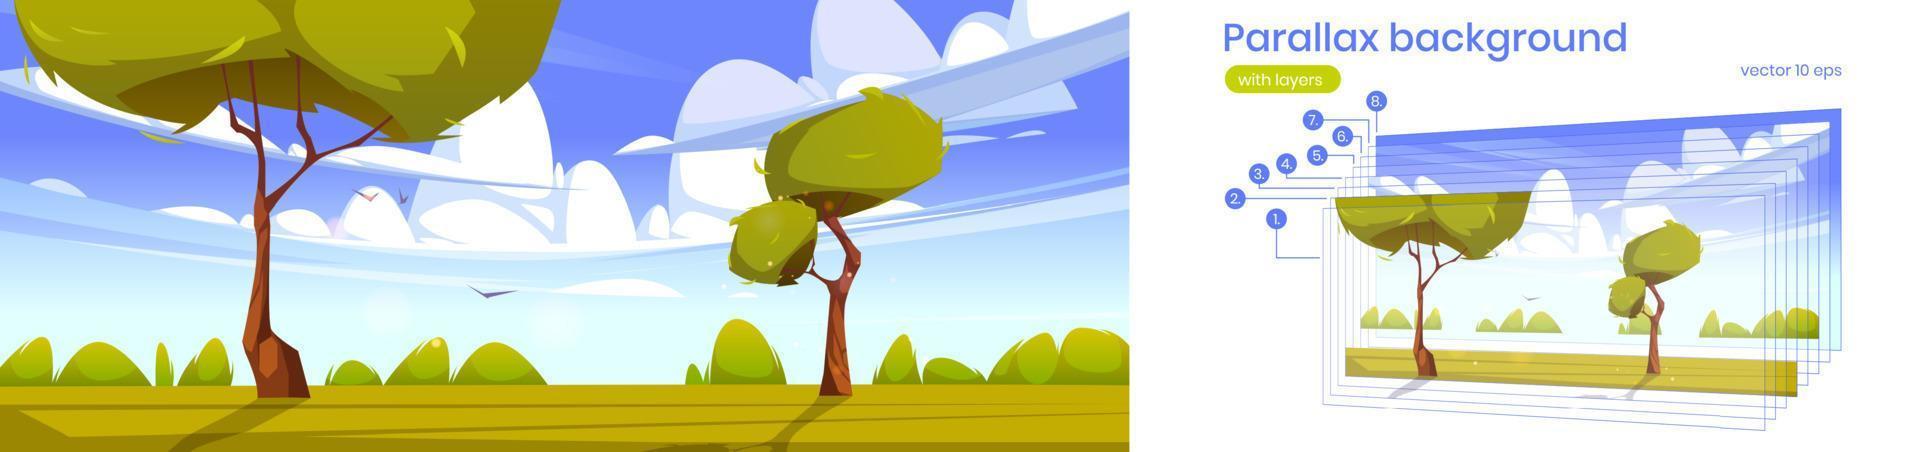 Parallax background with summer landscape vector